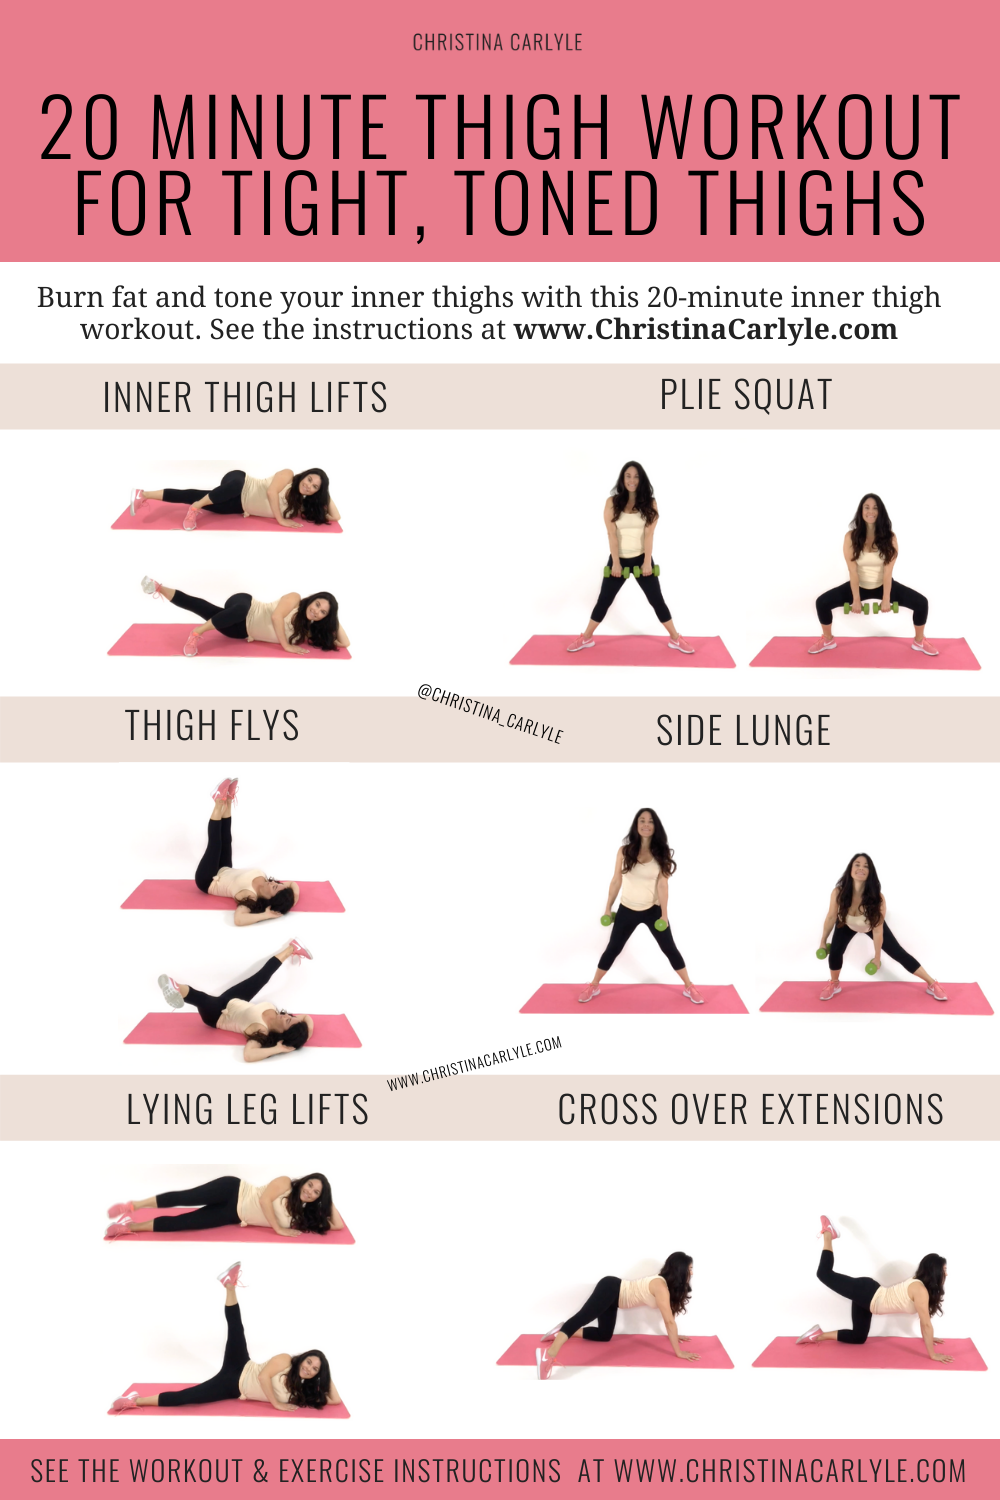 10 Minute Inner Thigh Toning Follow Along Workout - Live Lean TV